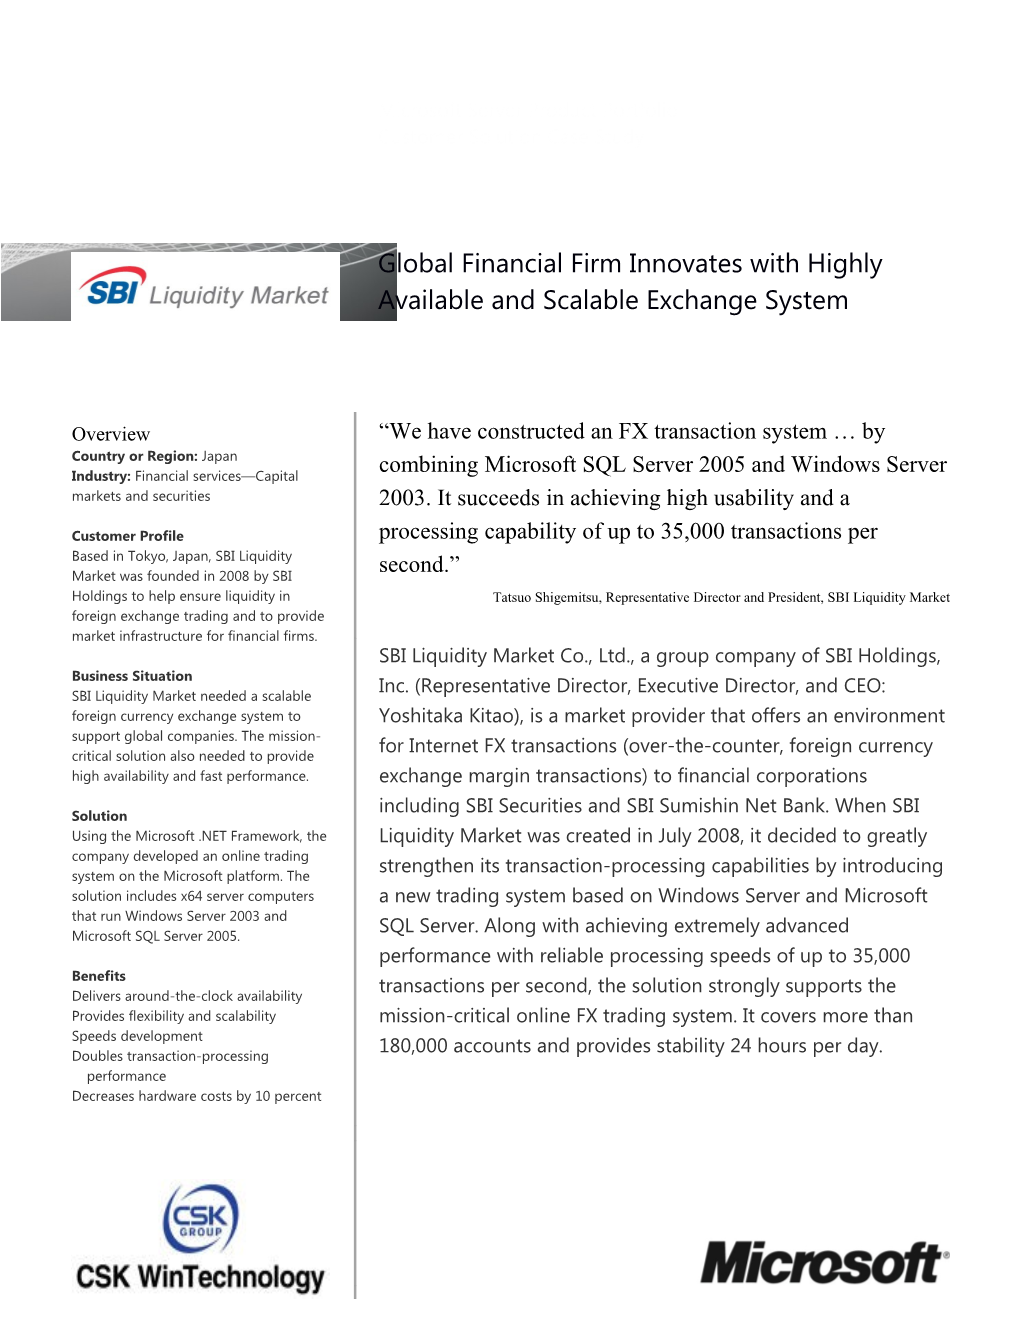 Global Financial Firm Innovates with Highly Available and Scalable Exchange System